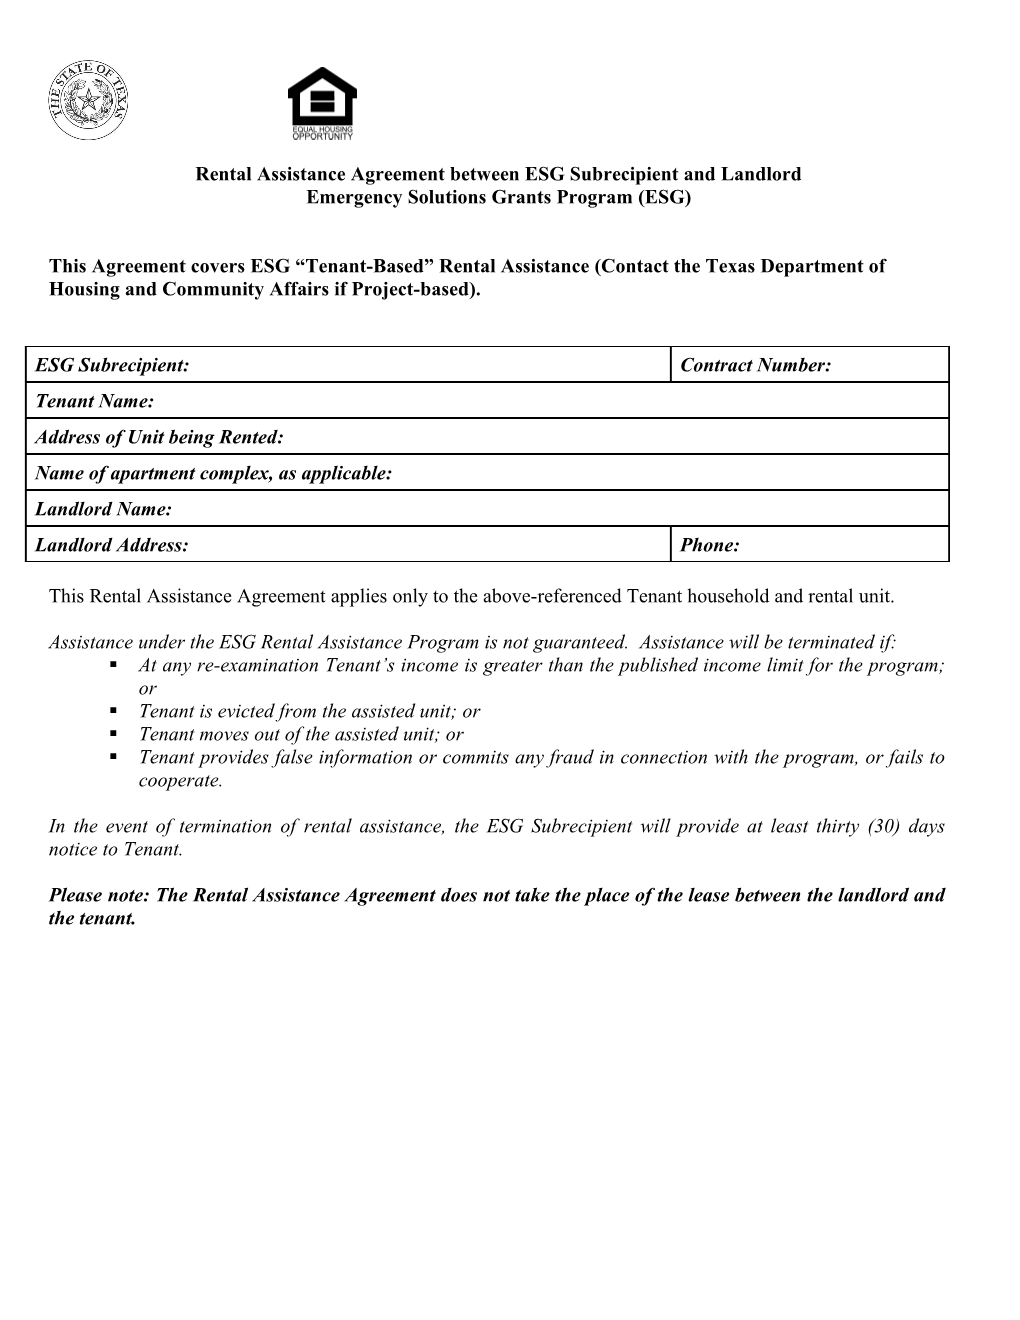 Rental Assistance Agreement Between Contract Administrator and Landlord